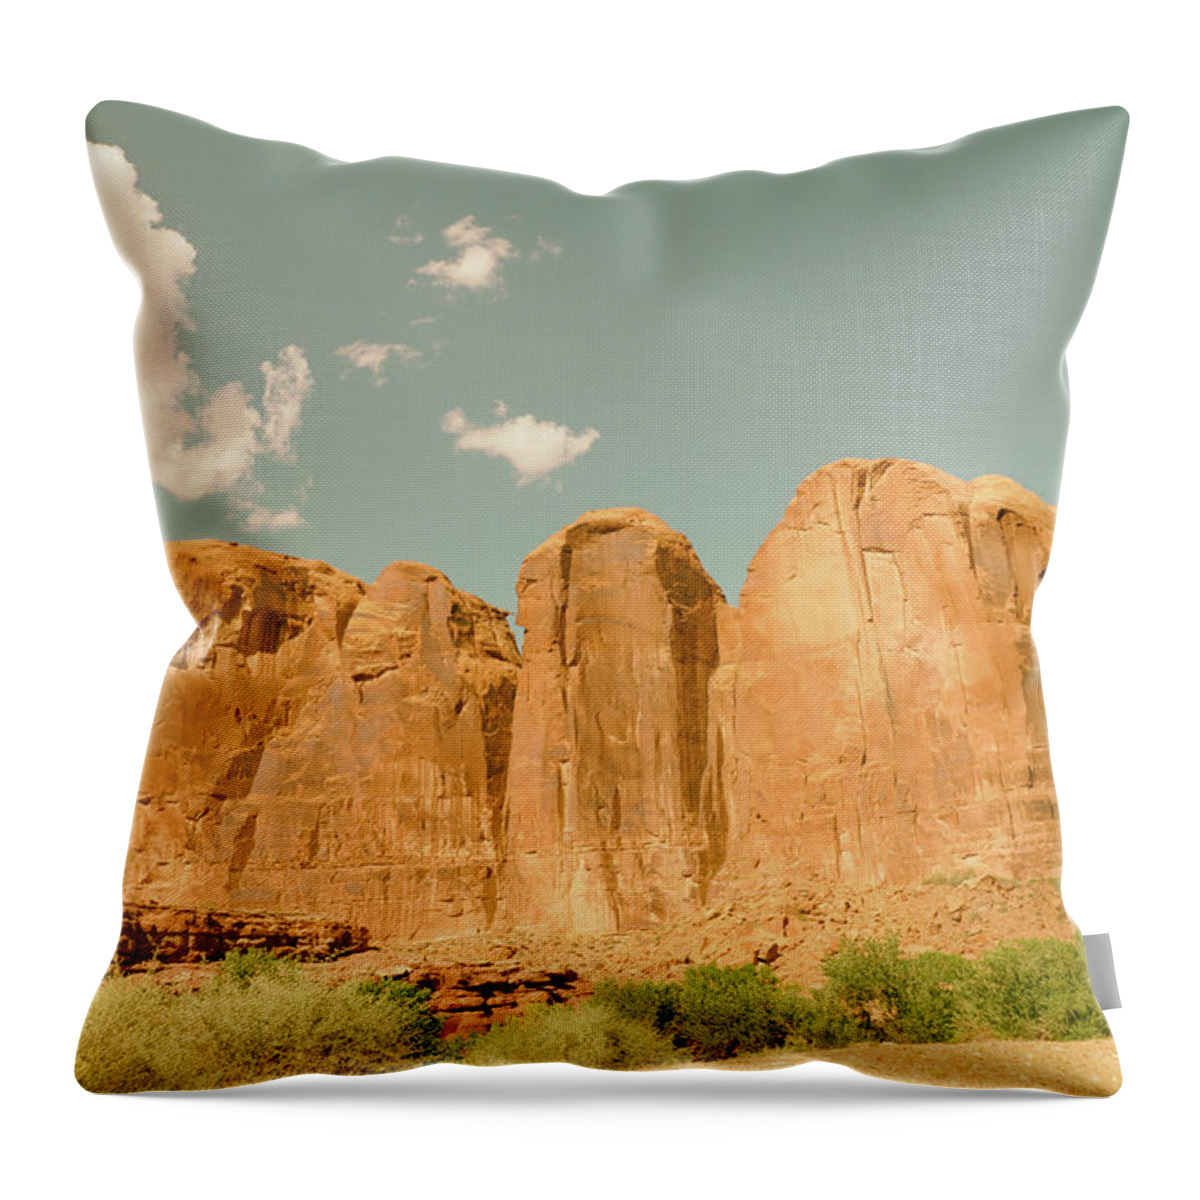 Backgrounds Throw Pillow featuring the photograph Vintage Look Desert Scene #1 by Kyle Lee